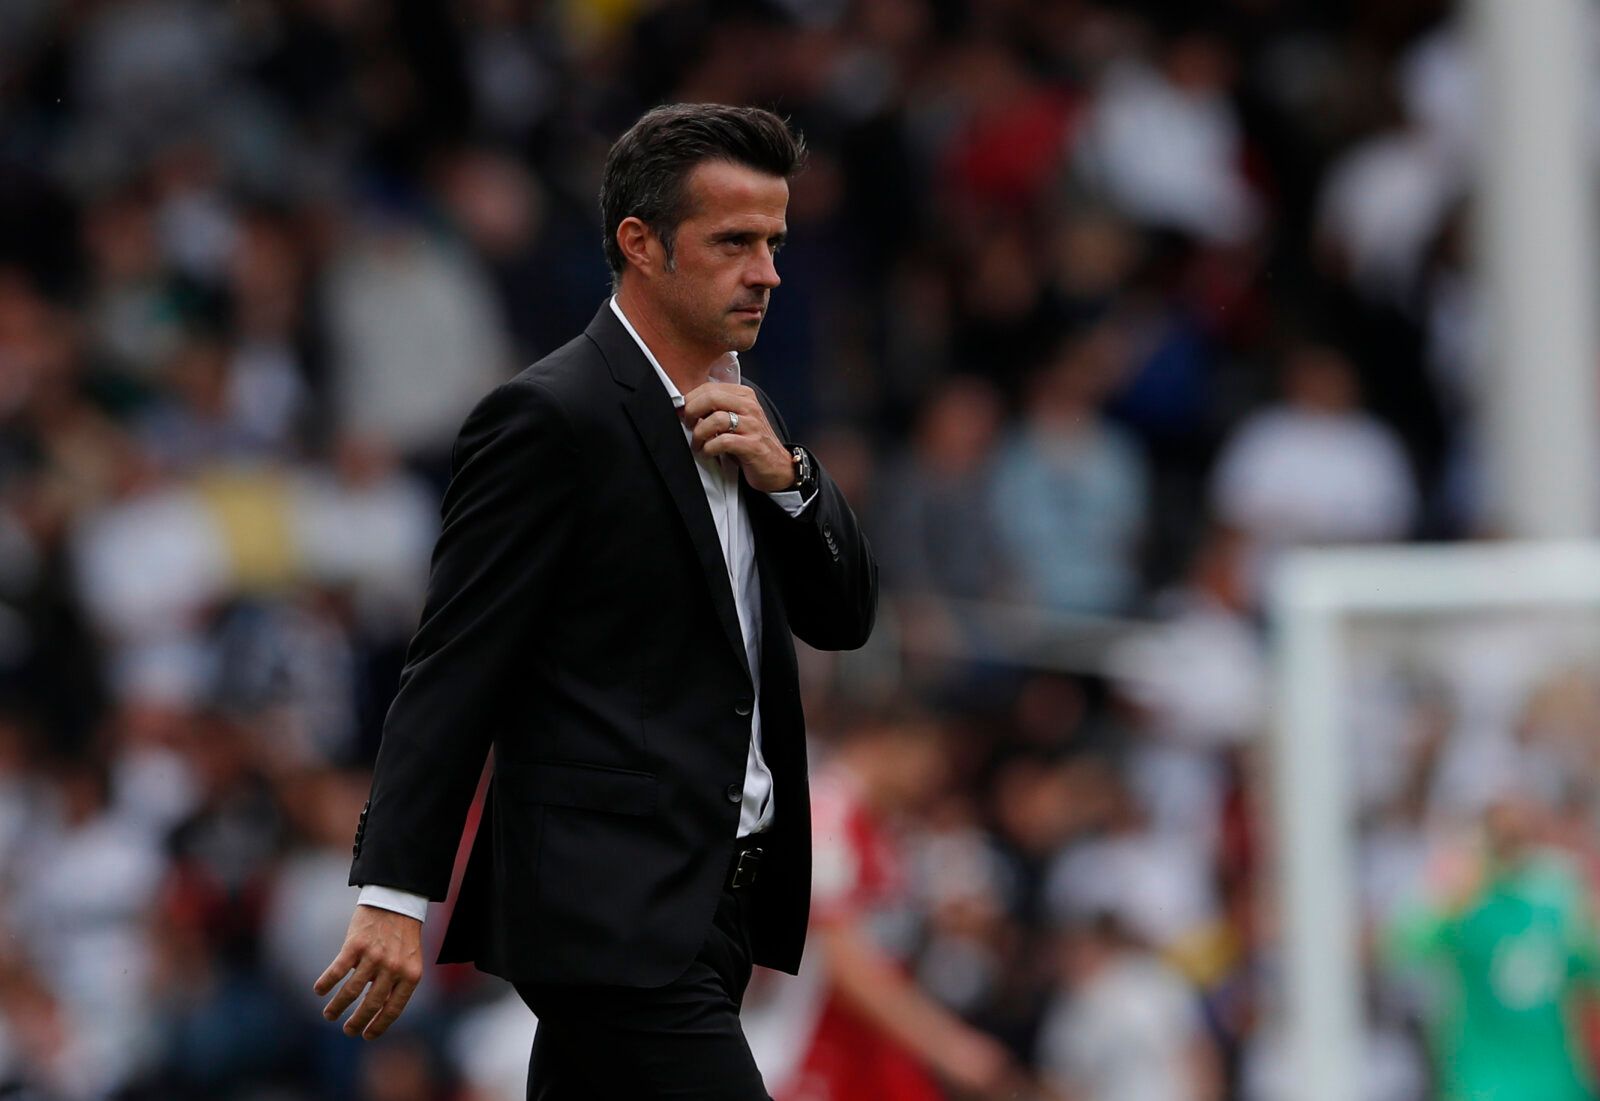 Soccer Football - Championship - Fulham v Middlesbrough - Craven Cottage, London, Britain - August 8, 2021 Fulham manager Marco Silva looks on Action Images/Andrew Couldridge